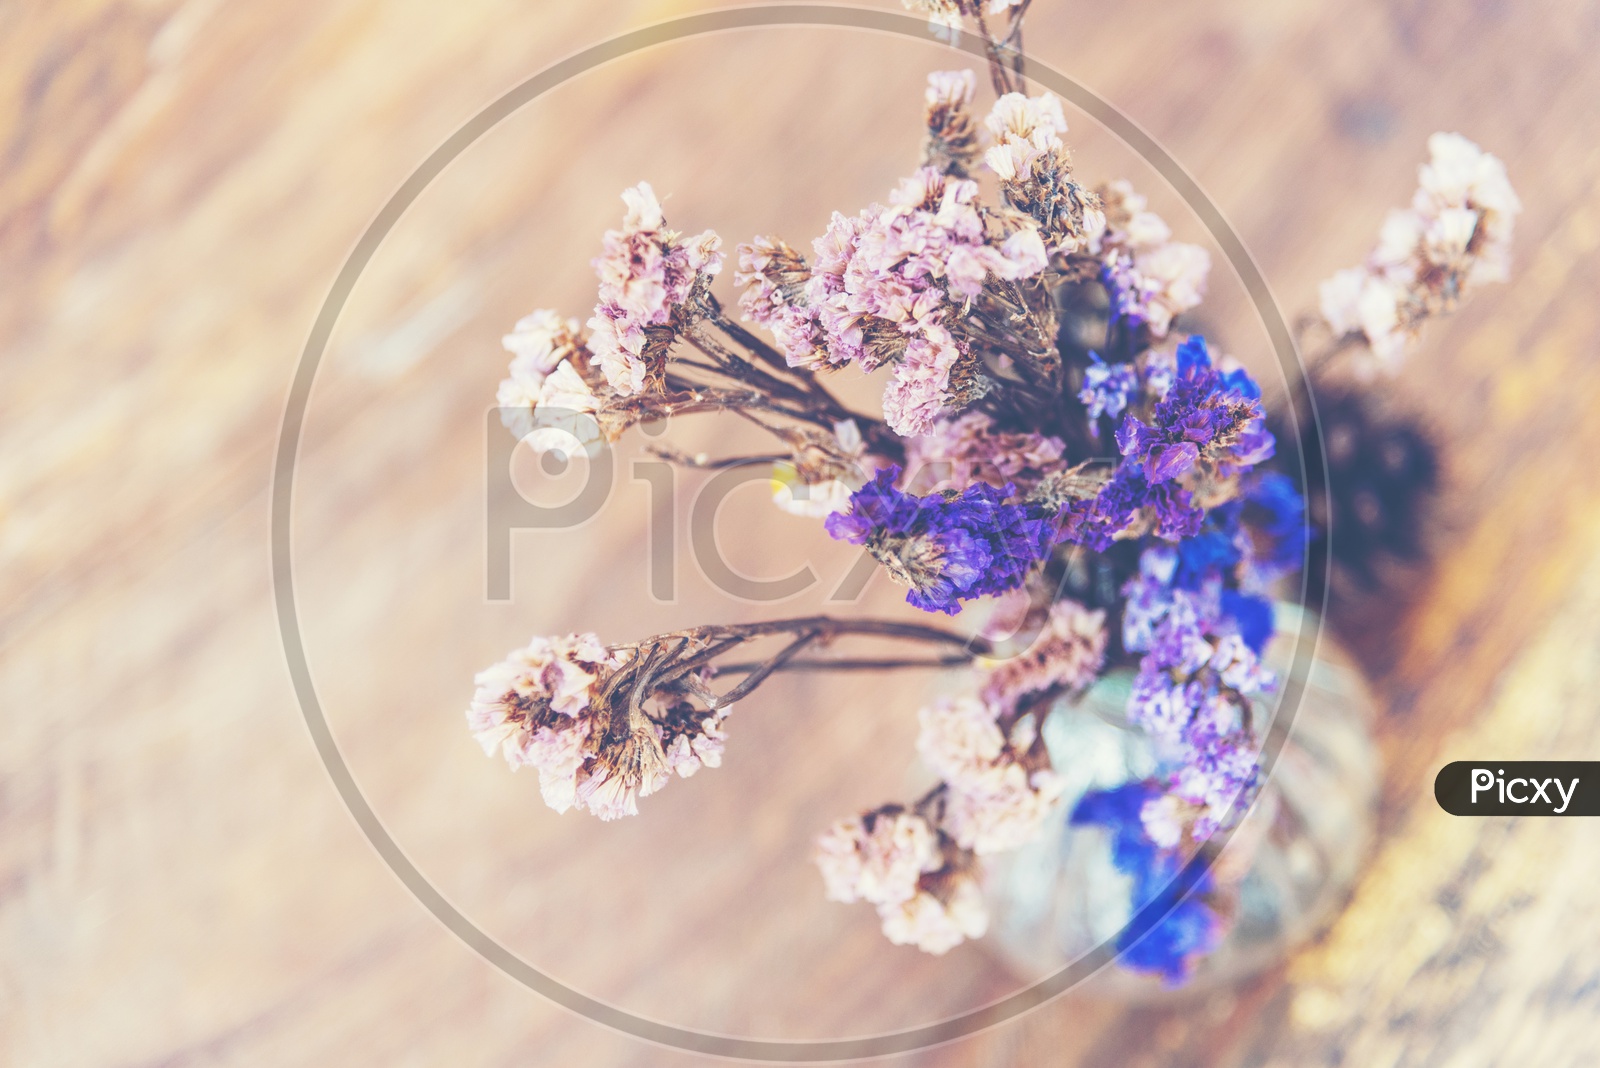 Summer colorful flowers on vintage wooden background